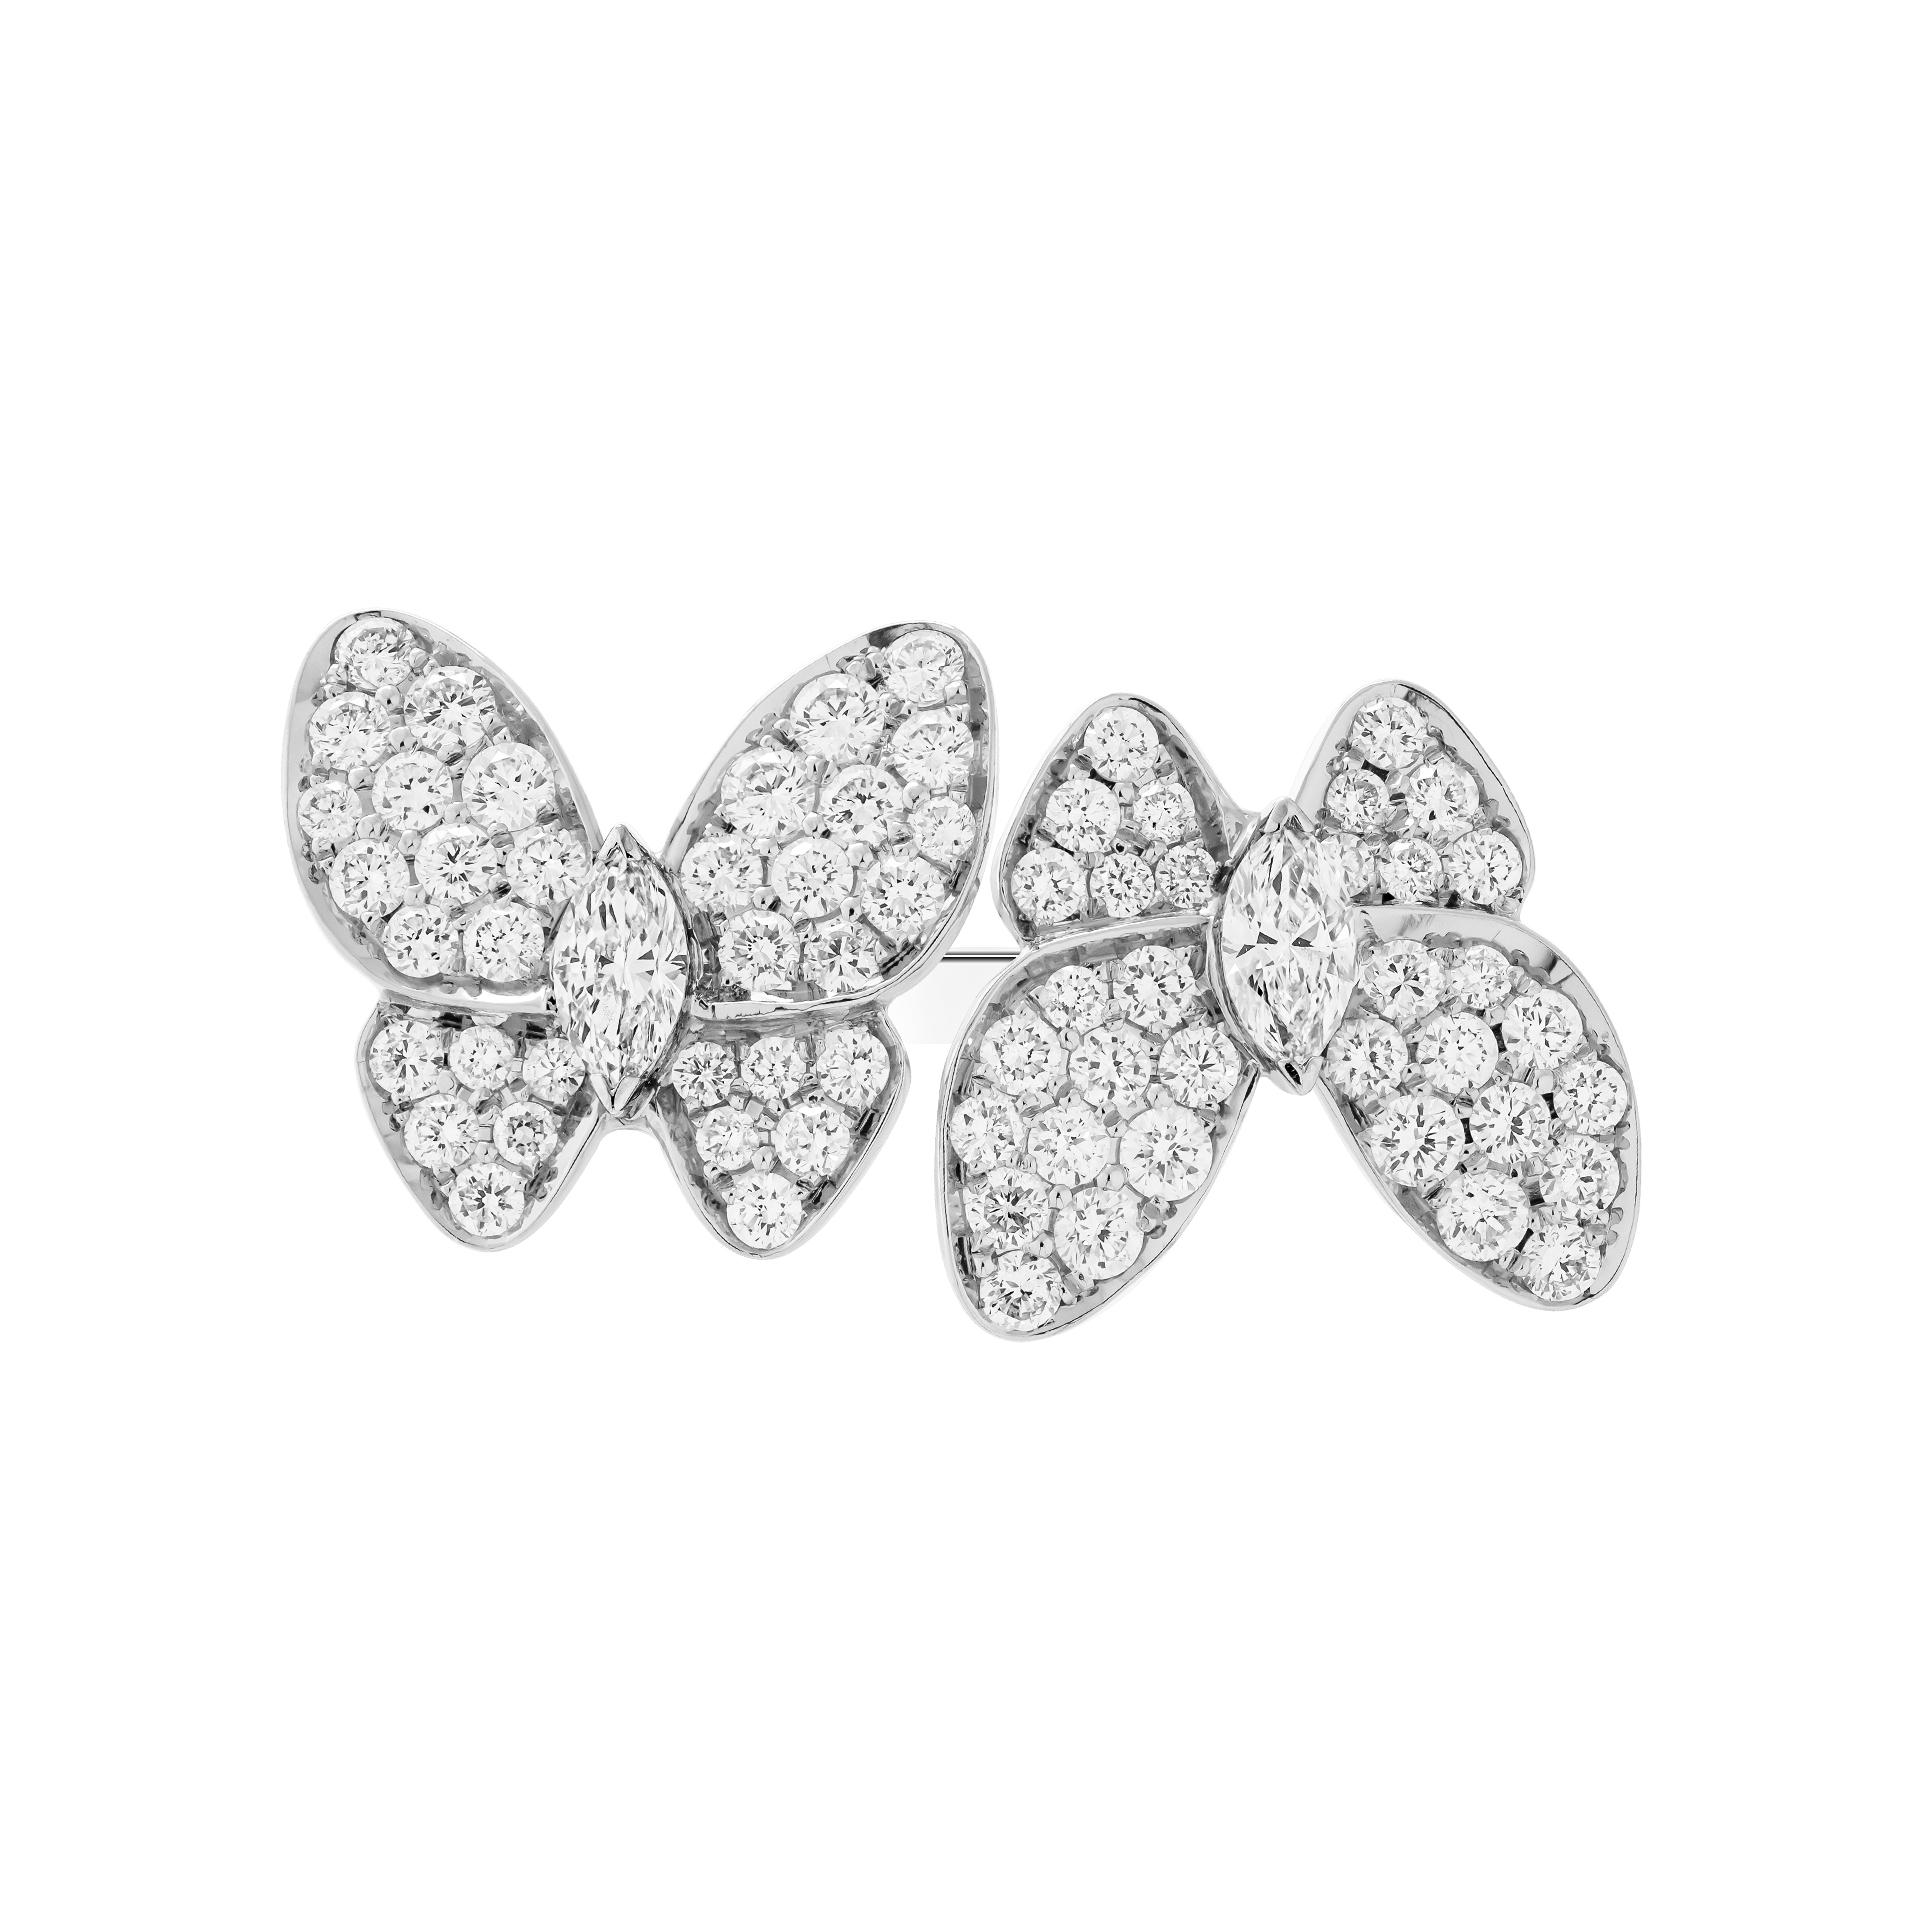 Diamond Butterfly ring in 18K White gold 
With Natural full cut diamonds F/G VVS
Total Carat Weight: 2.7ct 
Size: 7
Retail: 15,000$
Comes in a box, GIA available upon request 
